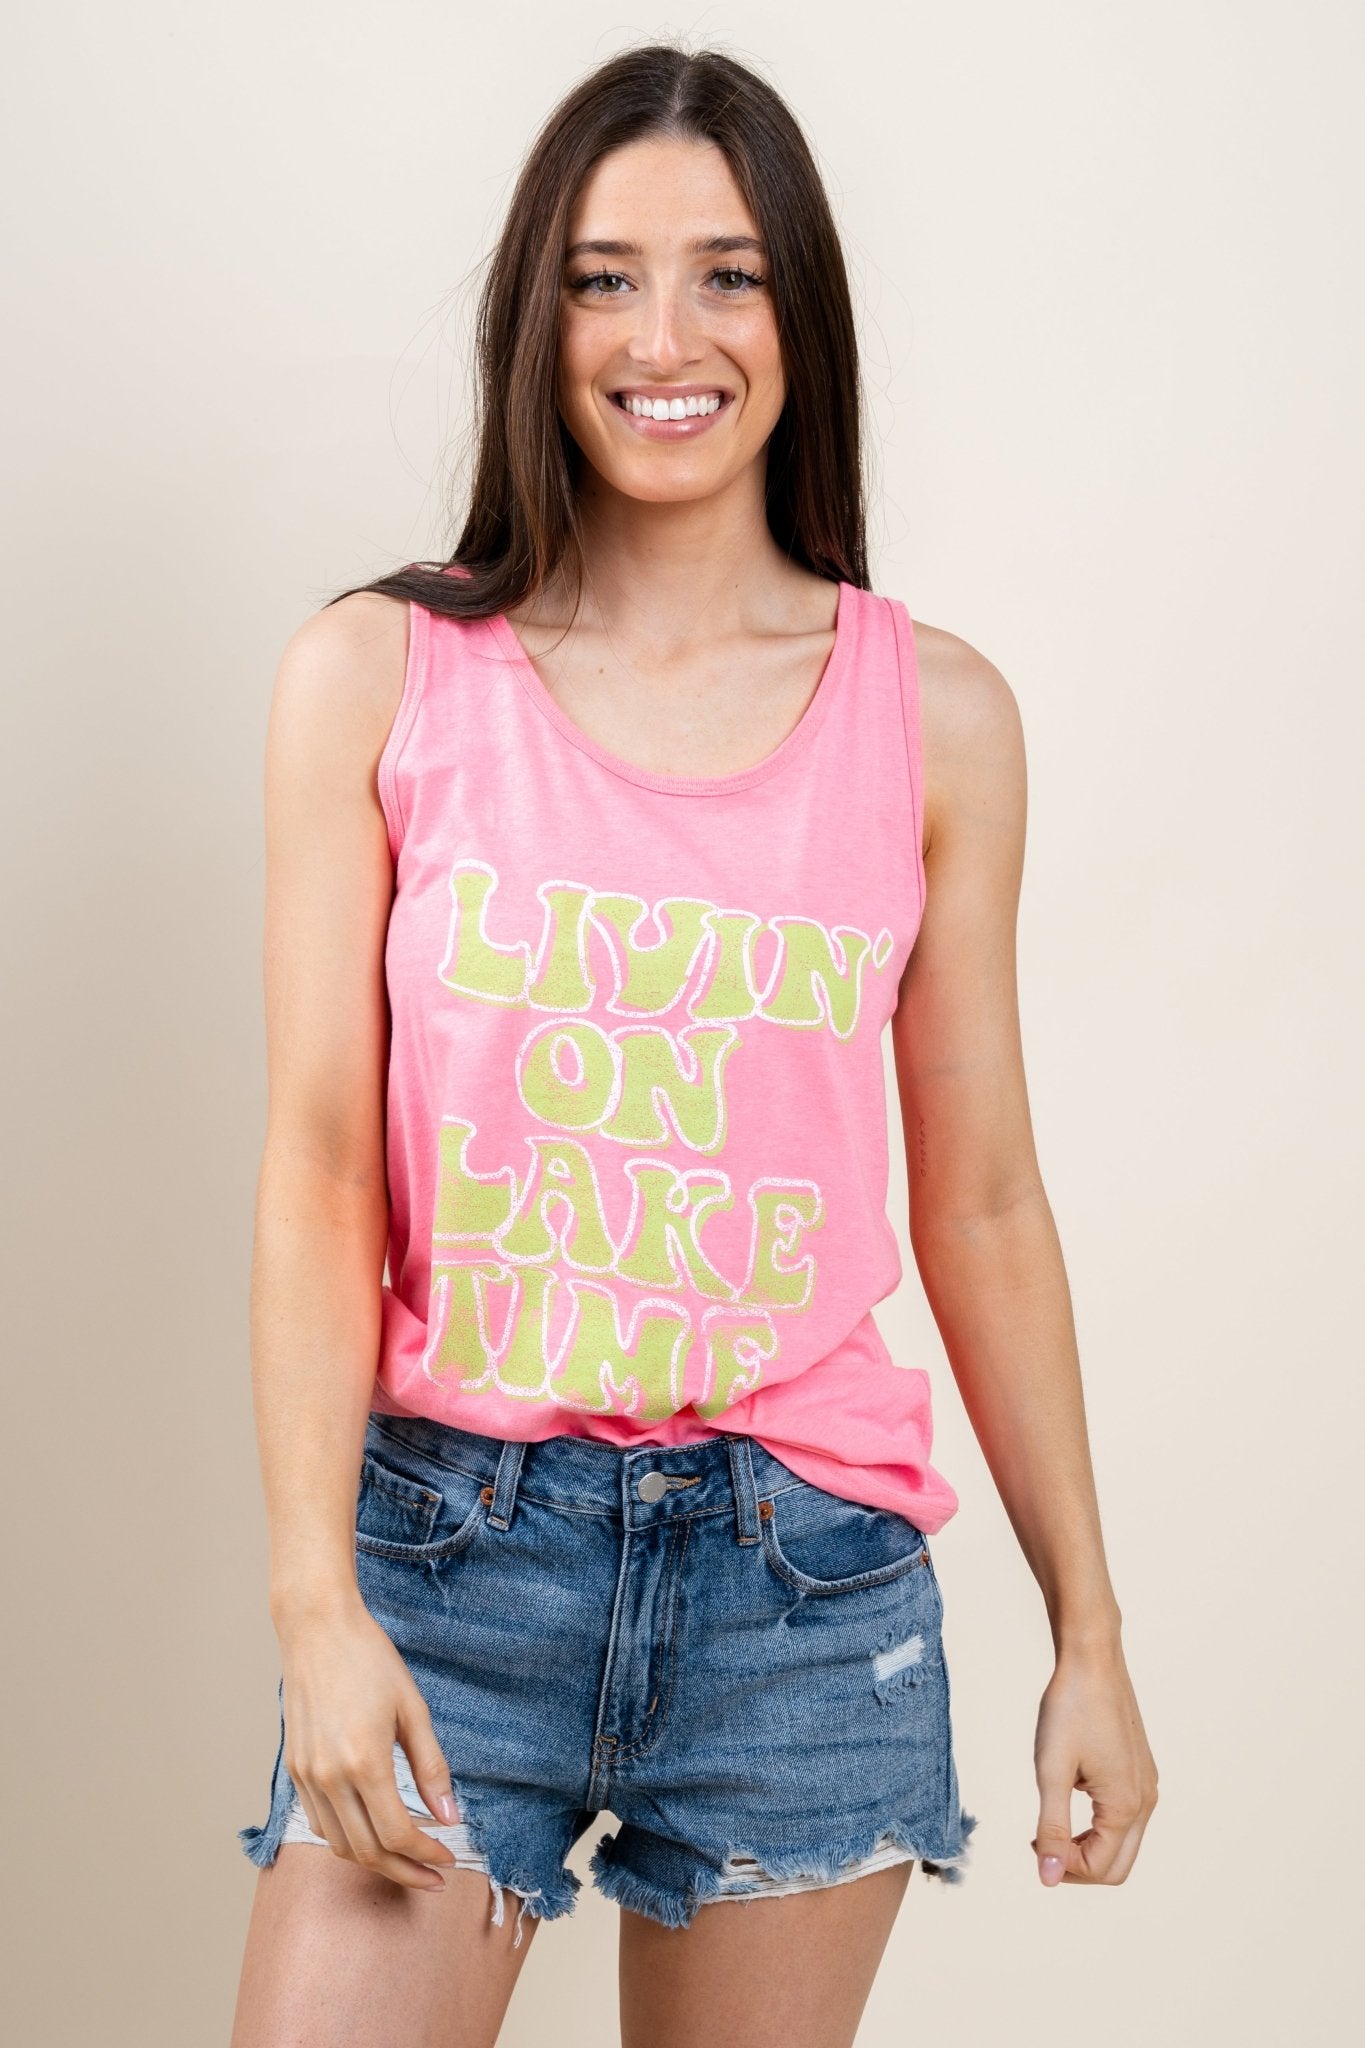 Living on lake time tank top neon pink - DayDreamer Graphic Band Tees at Lush Fashion Lounge Trendy Boutique in Oklahoma City